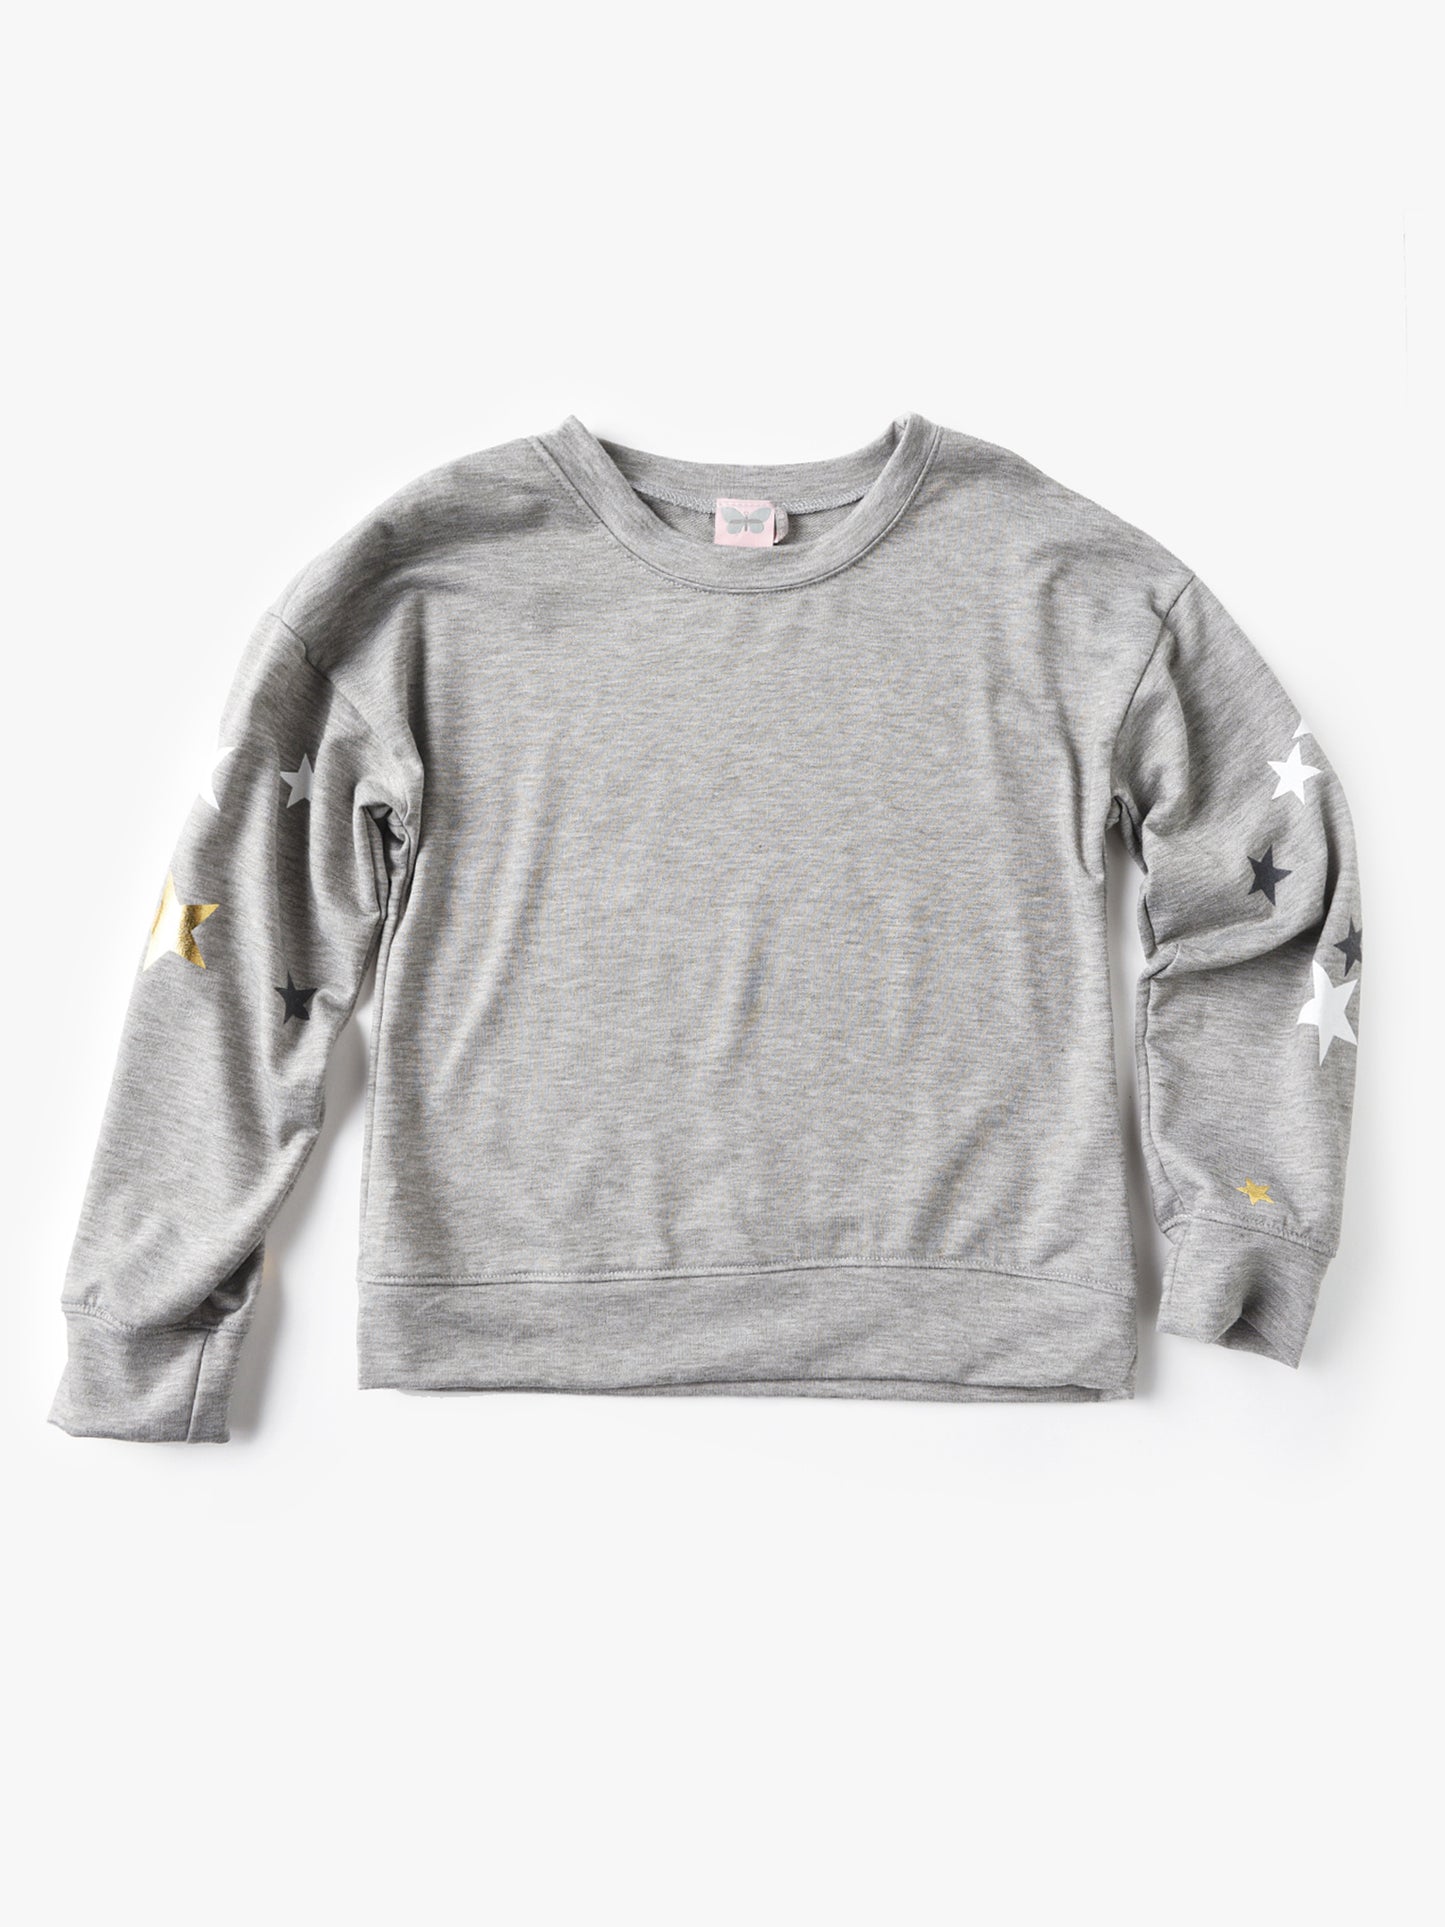 For All Seasons Crew Neck Star Print On Sleeve Sweater